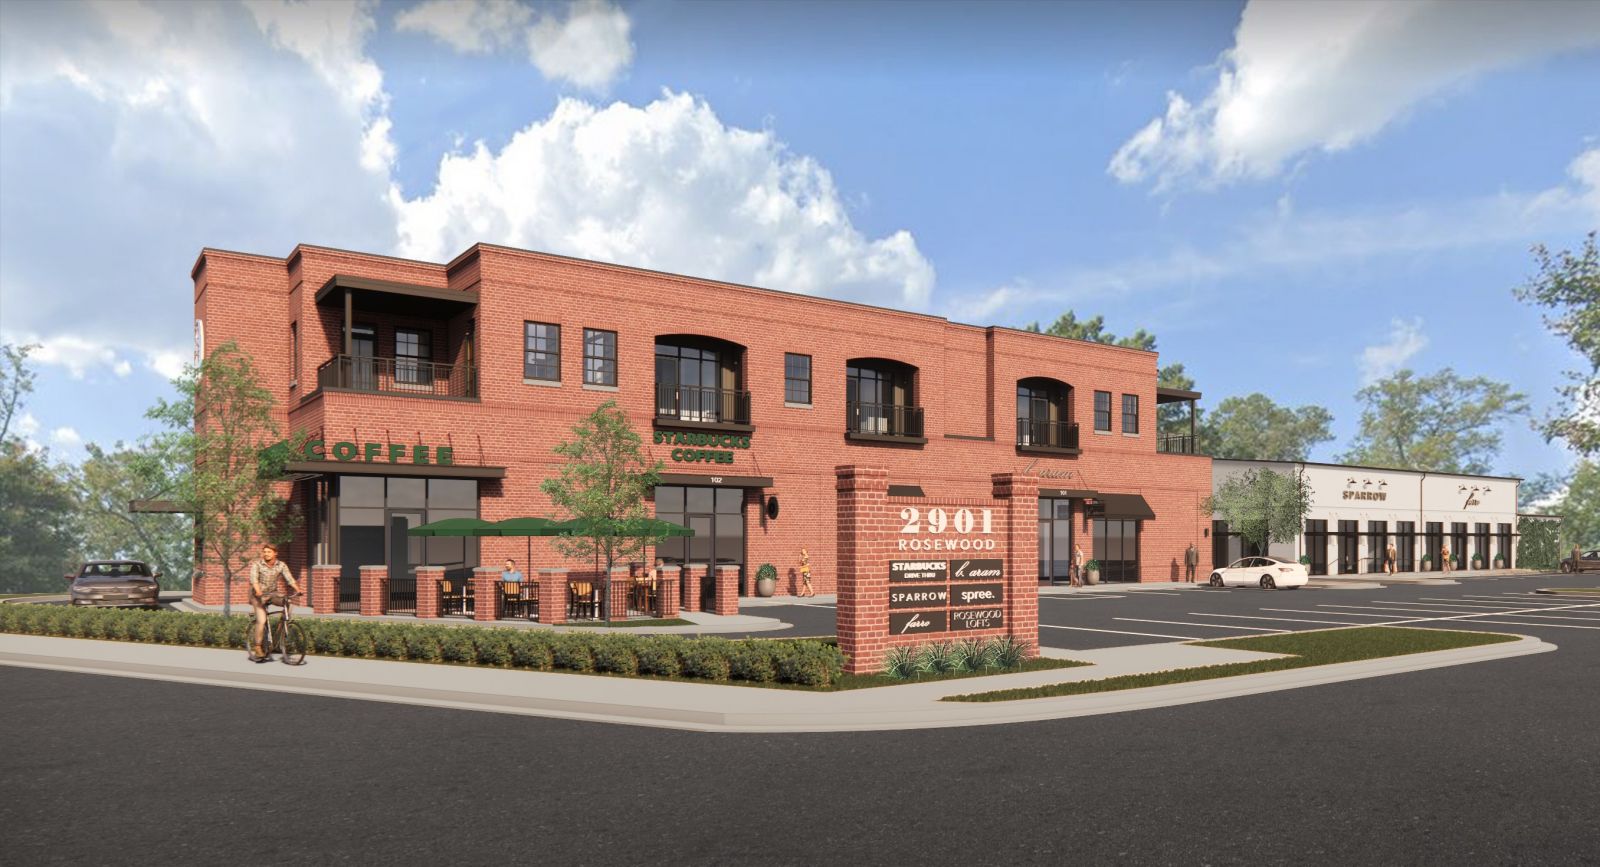 A new project spearheaded by Cason Development Group will transform the former Rosewood Church property into a mixed-use development including 52 apartments.  (Rendering/Provided)